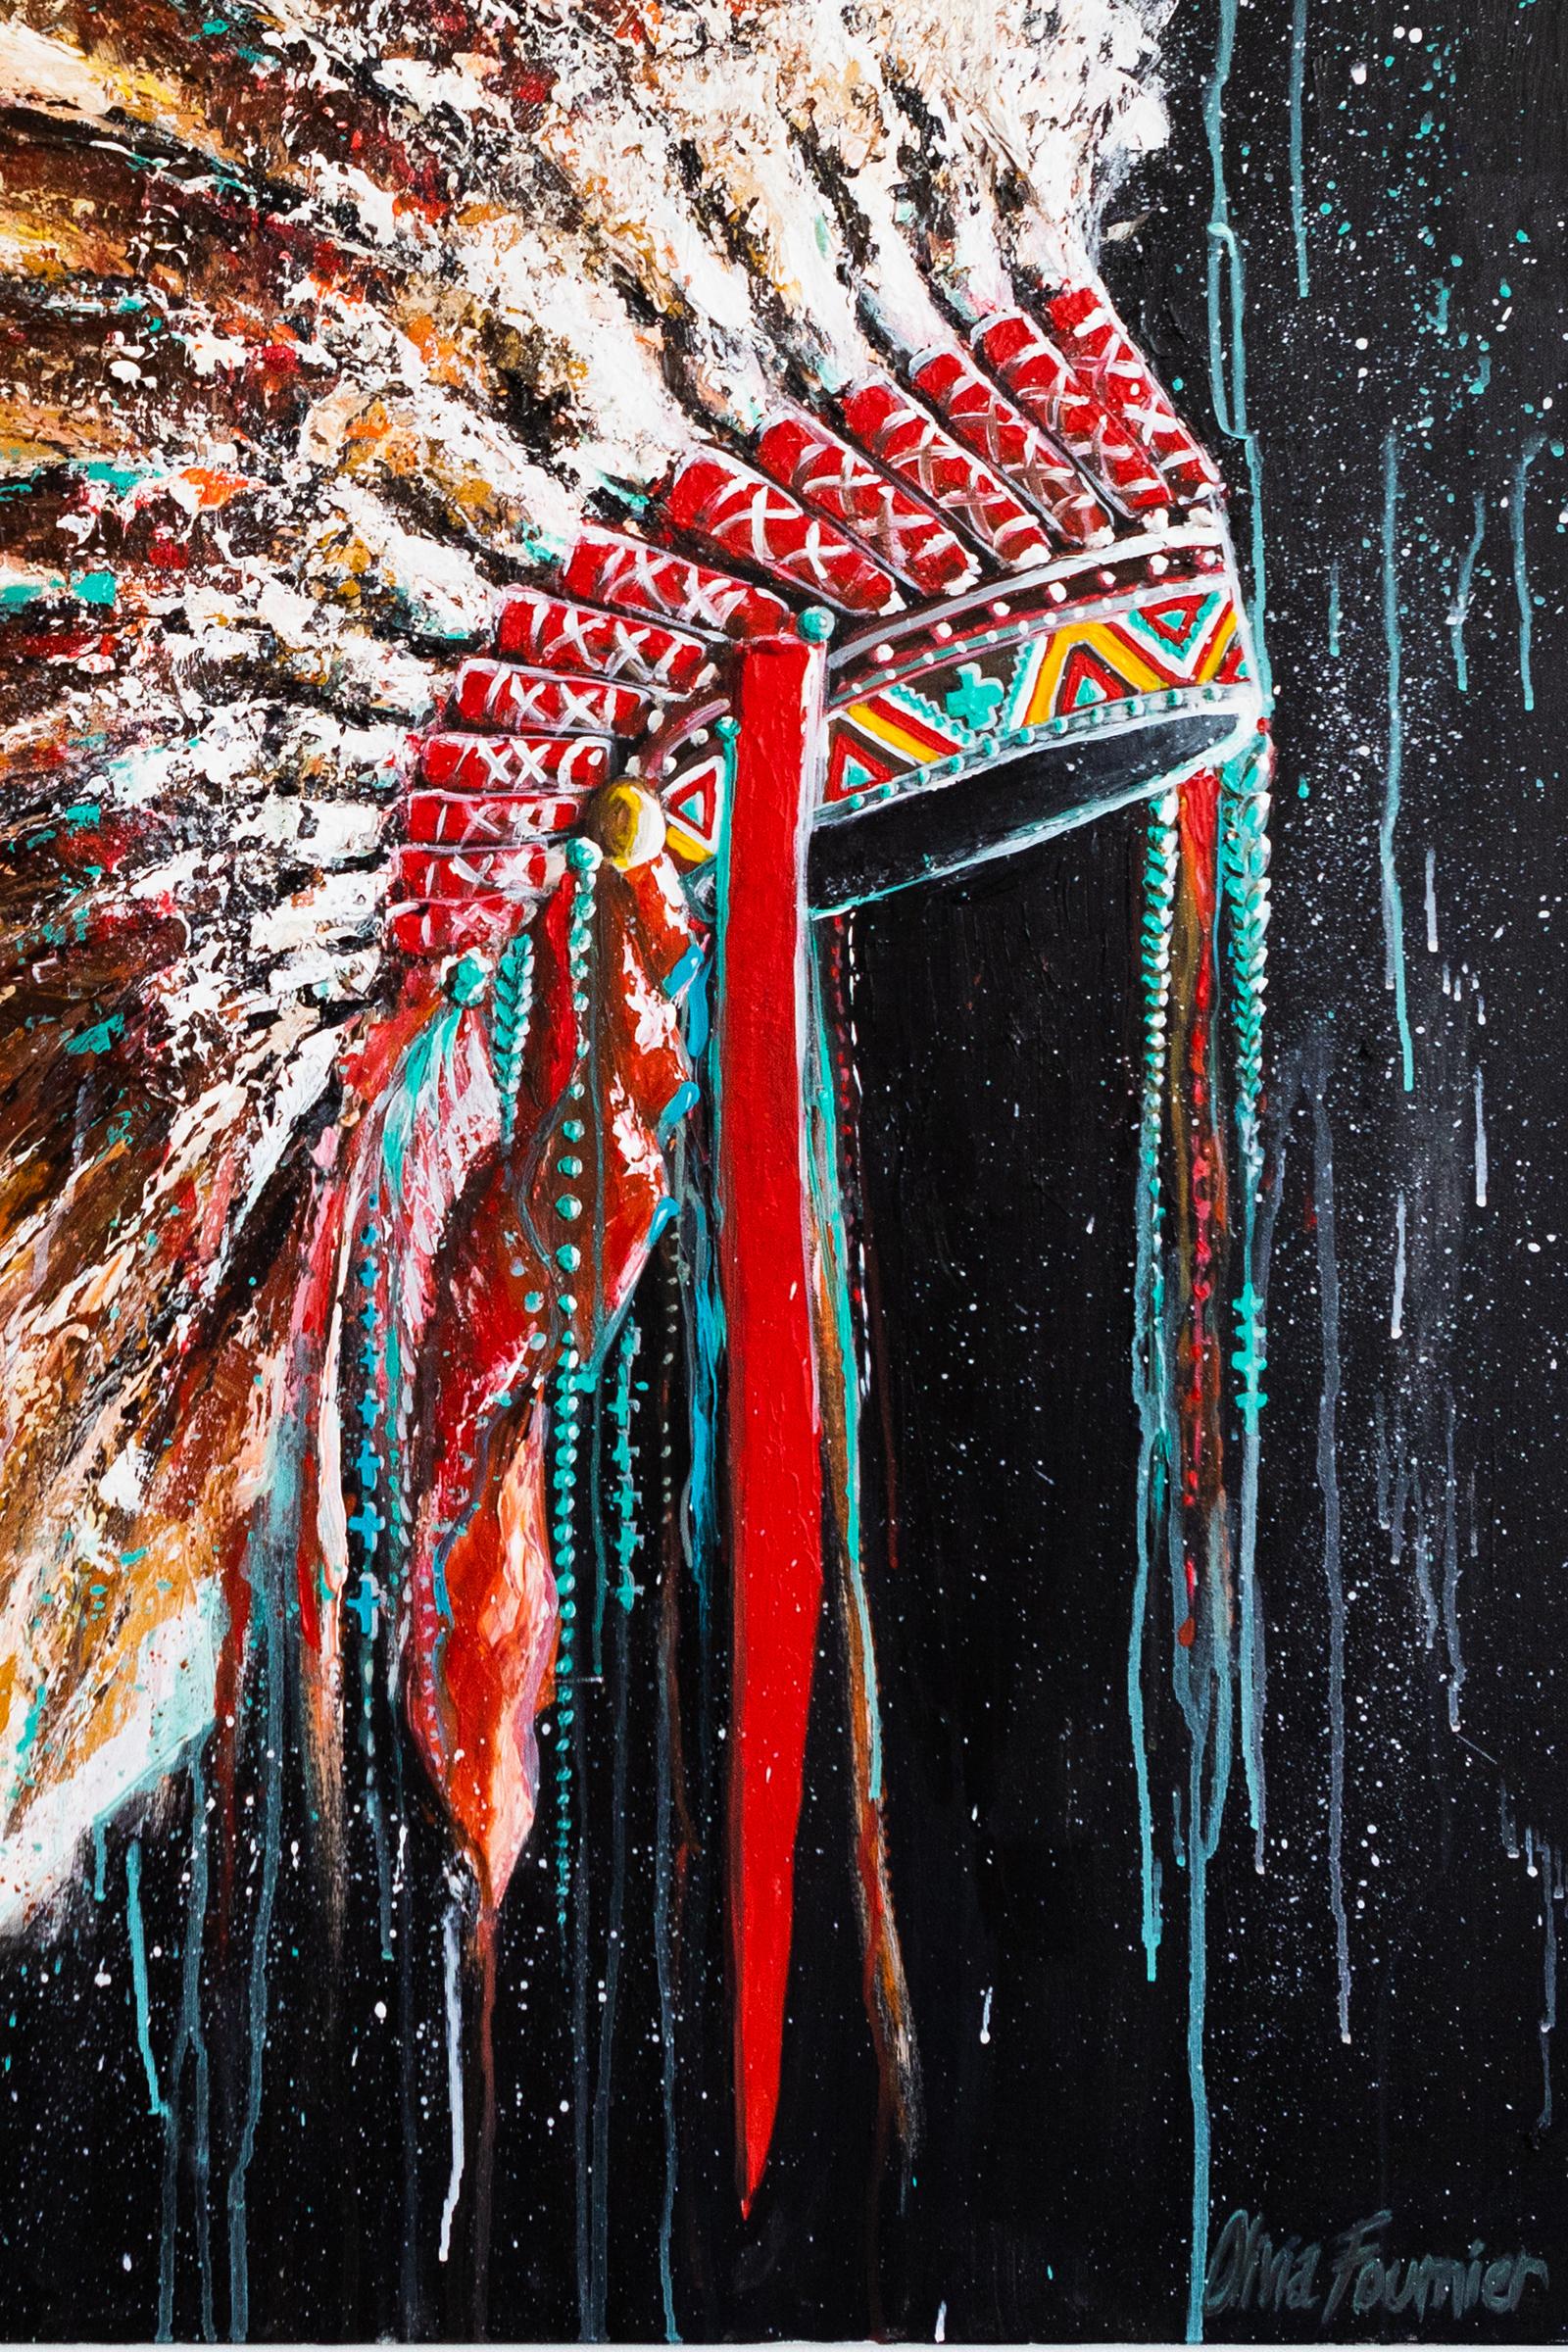 Painting headdress acrylic paint on canvas,
unique piece painted by Olivia Fournier.